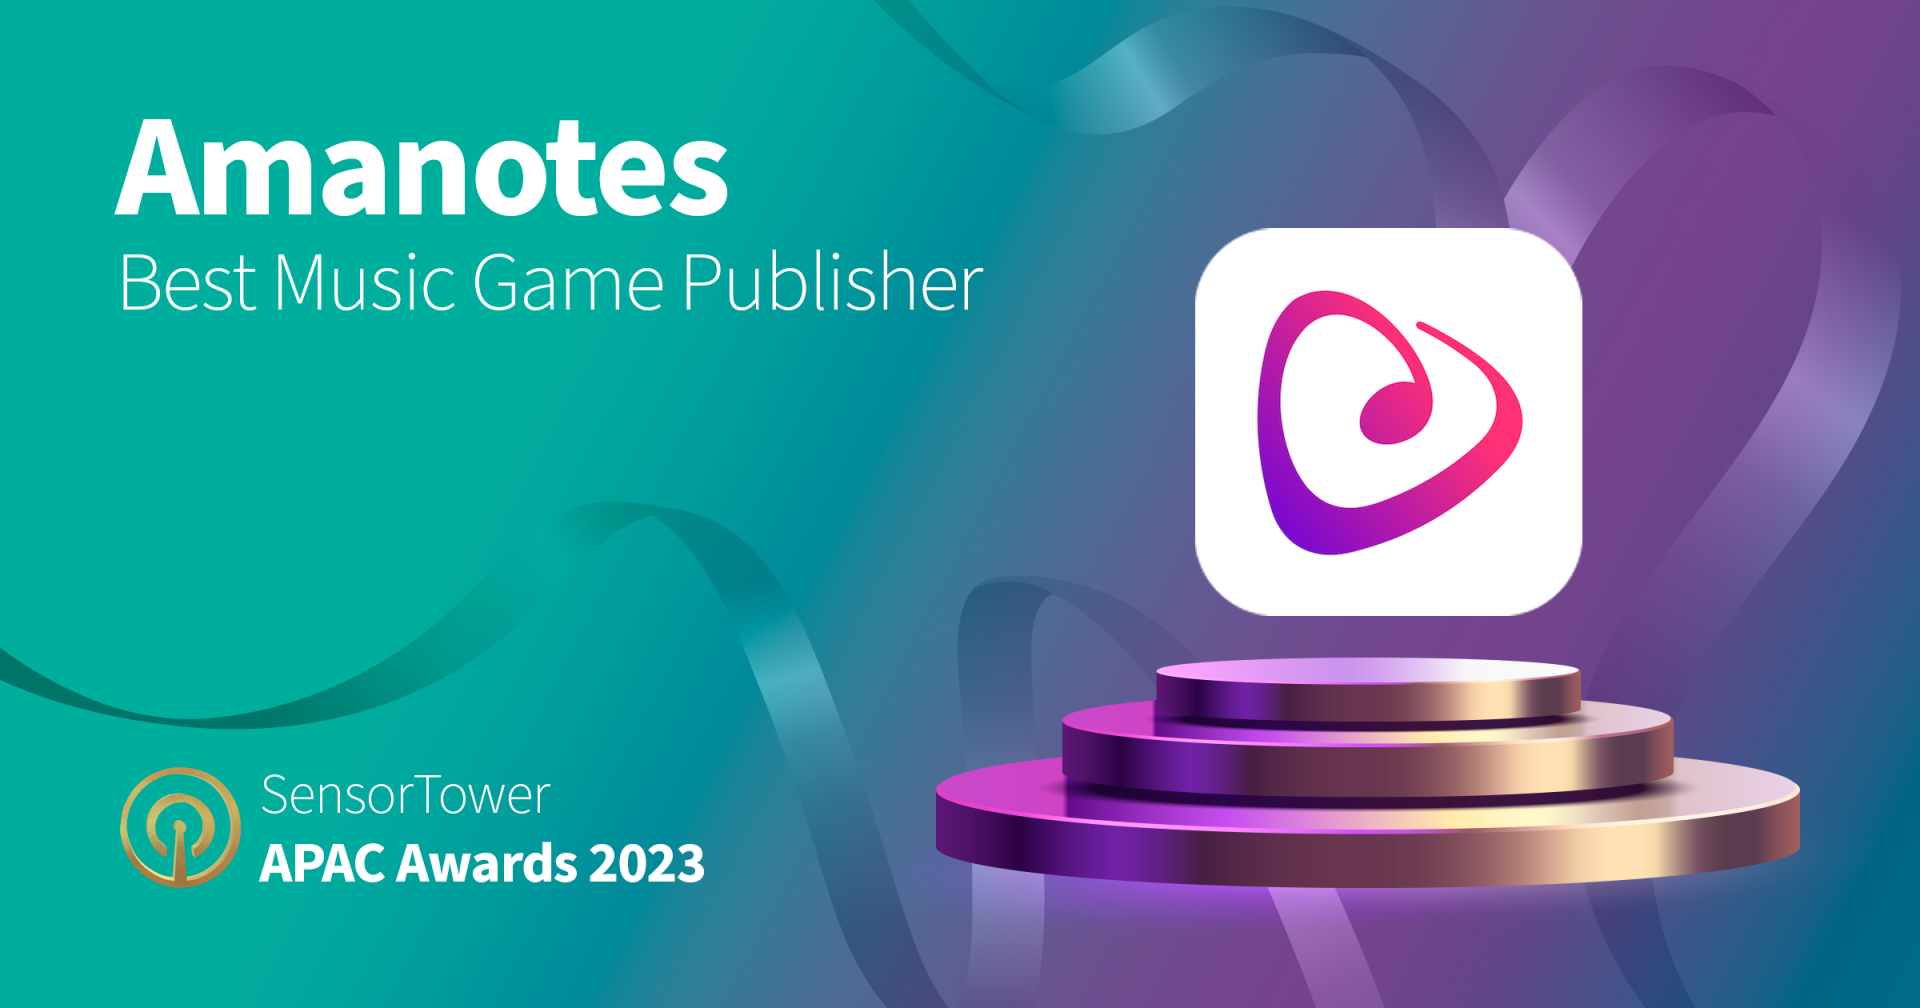 Amanotes crowned Best Music Game Publisher at awards